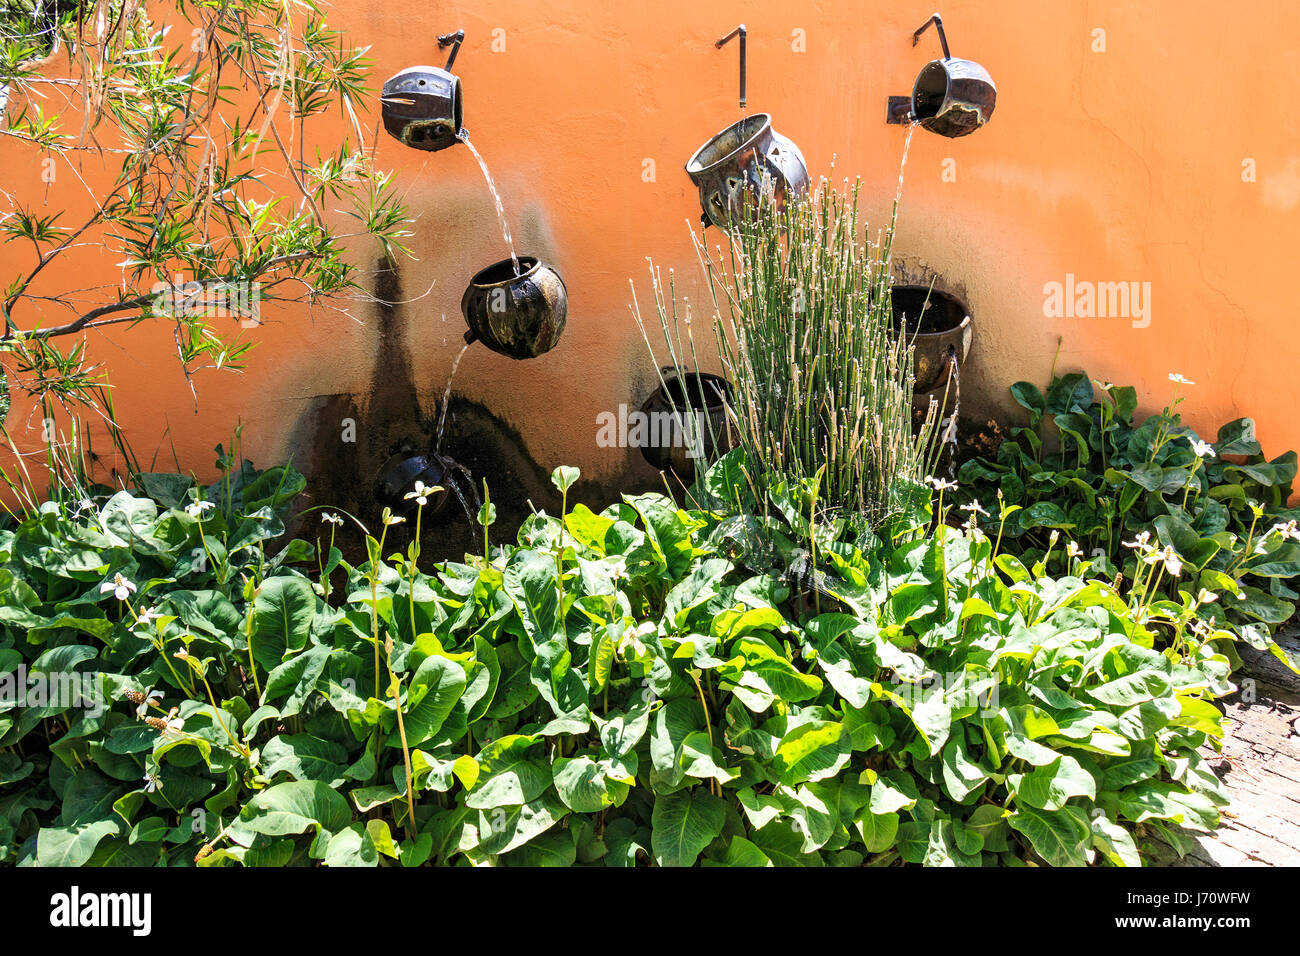 Water pours from pot to pot along a wall at Tohono Chul park, a beautiful botanical garden in Tucson, Arizona. Stock Photo